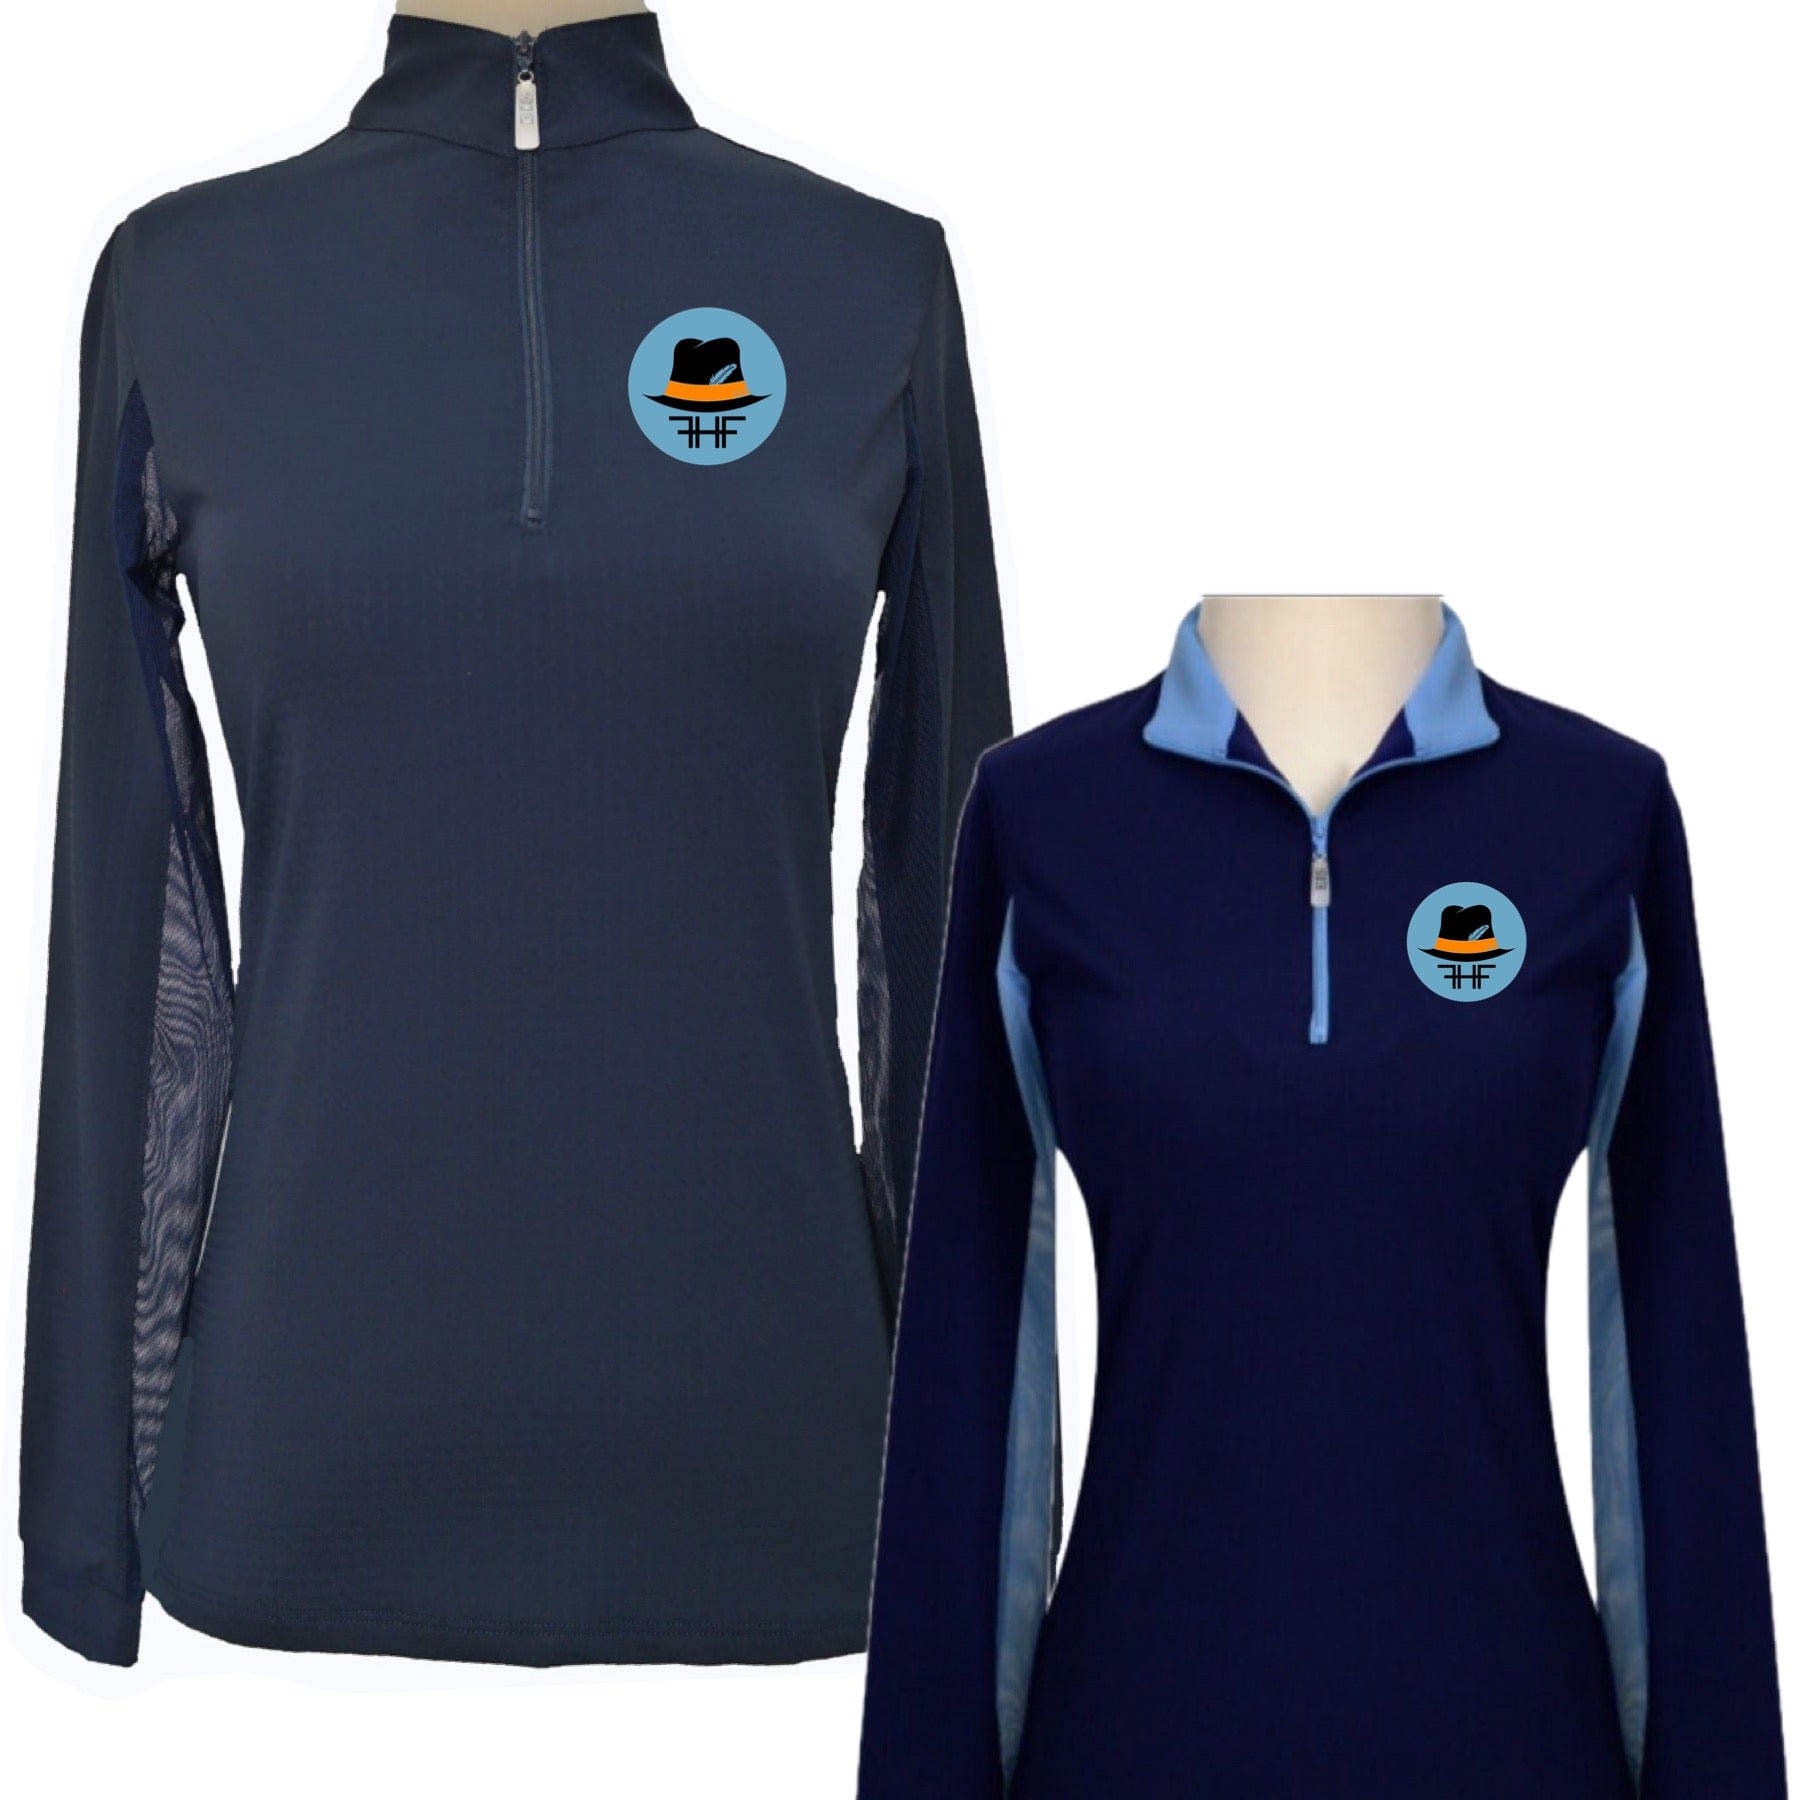 Equestrian Team Apparel Fetching hat Farm Sun Shirts equestrian team apparel online tack store mobile tack store custom farm apparel custom show stable clothing equestrian lifestyle horse show clothing riding clothes horses equestrian tack store